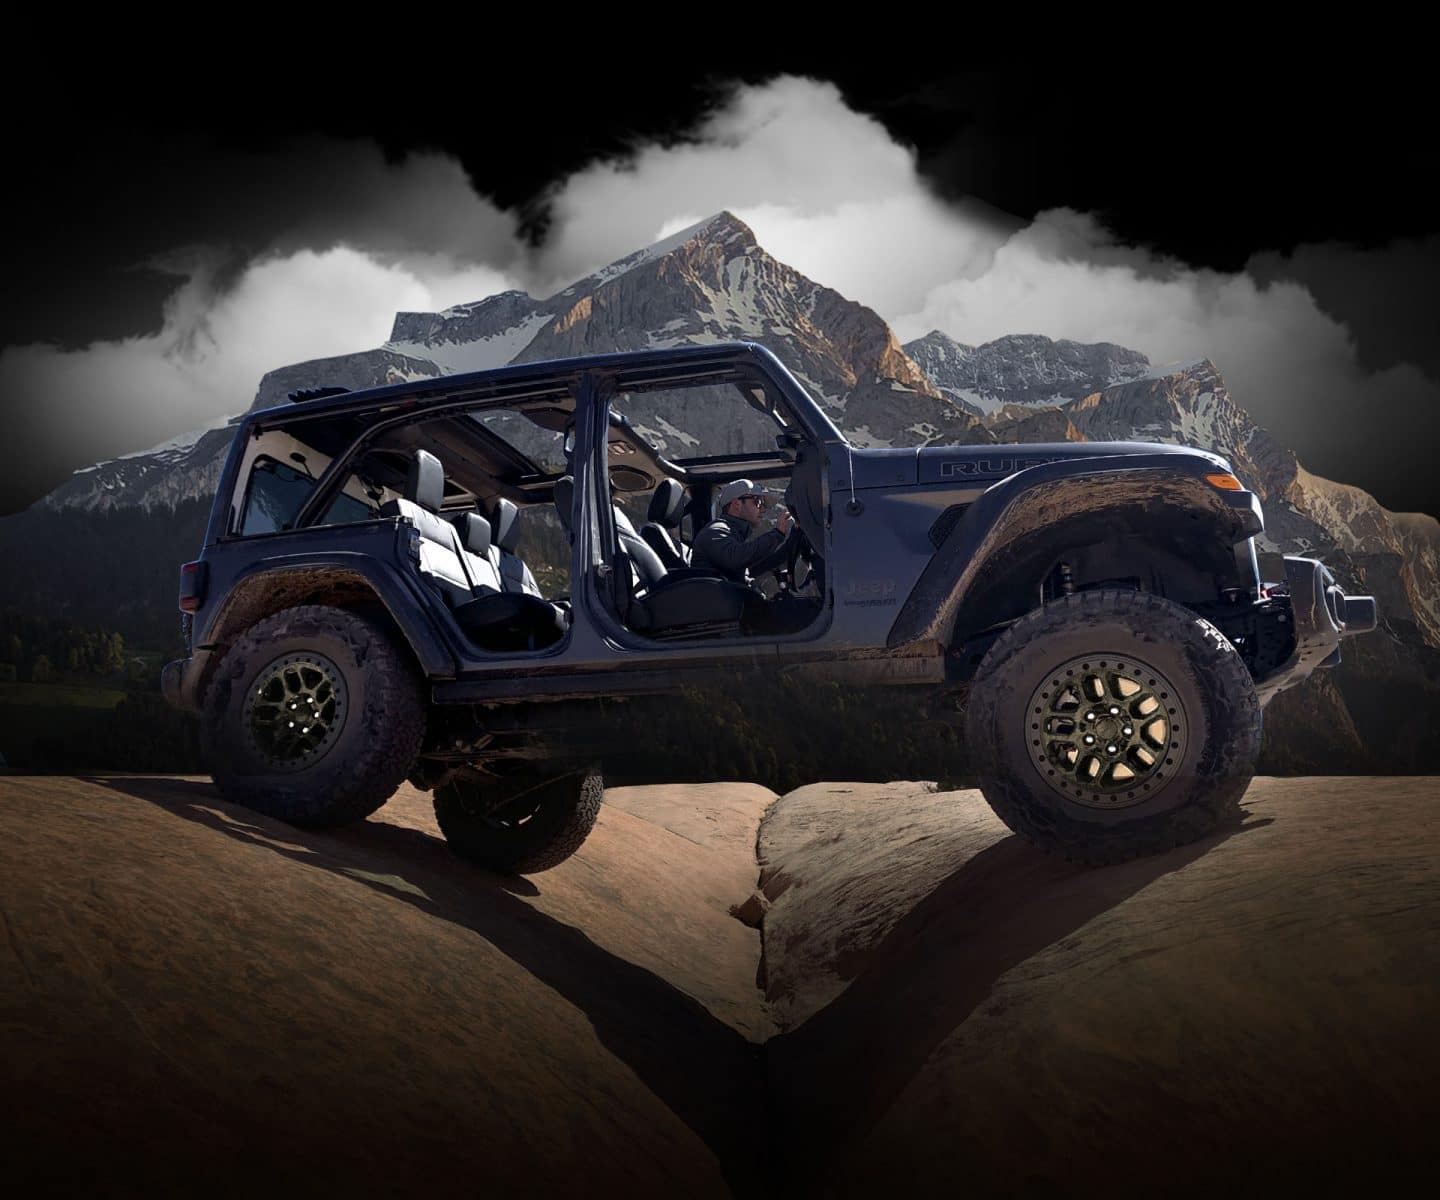 The 2023 Jeep Wrangler Rubicon 392 straddling two boulders as it's driven off-road with its doors off and top open.